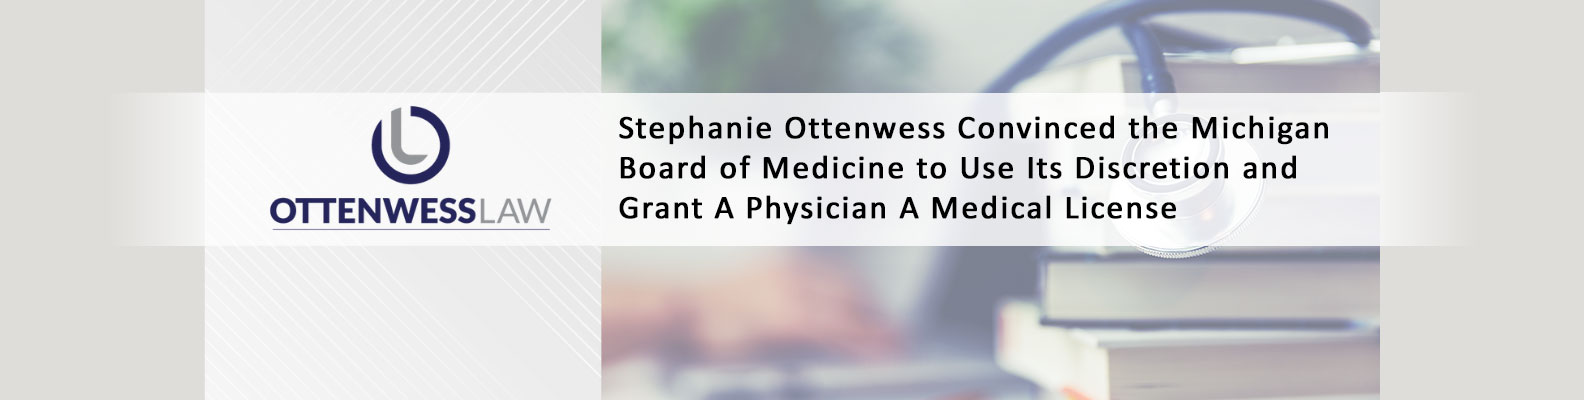 Stephanie Ottenwess Convinced the Michigan Board of Medicine to Use Its Discretion and Grant A Physician A Medical License